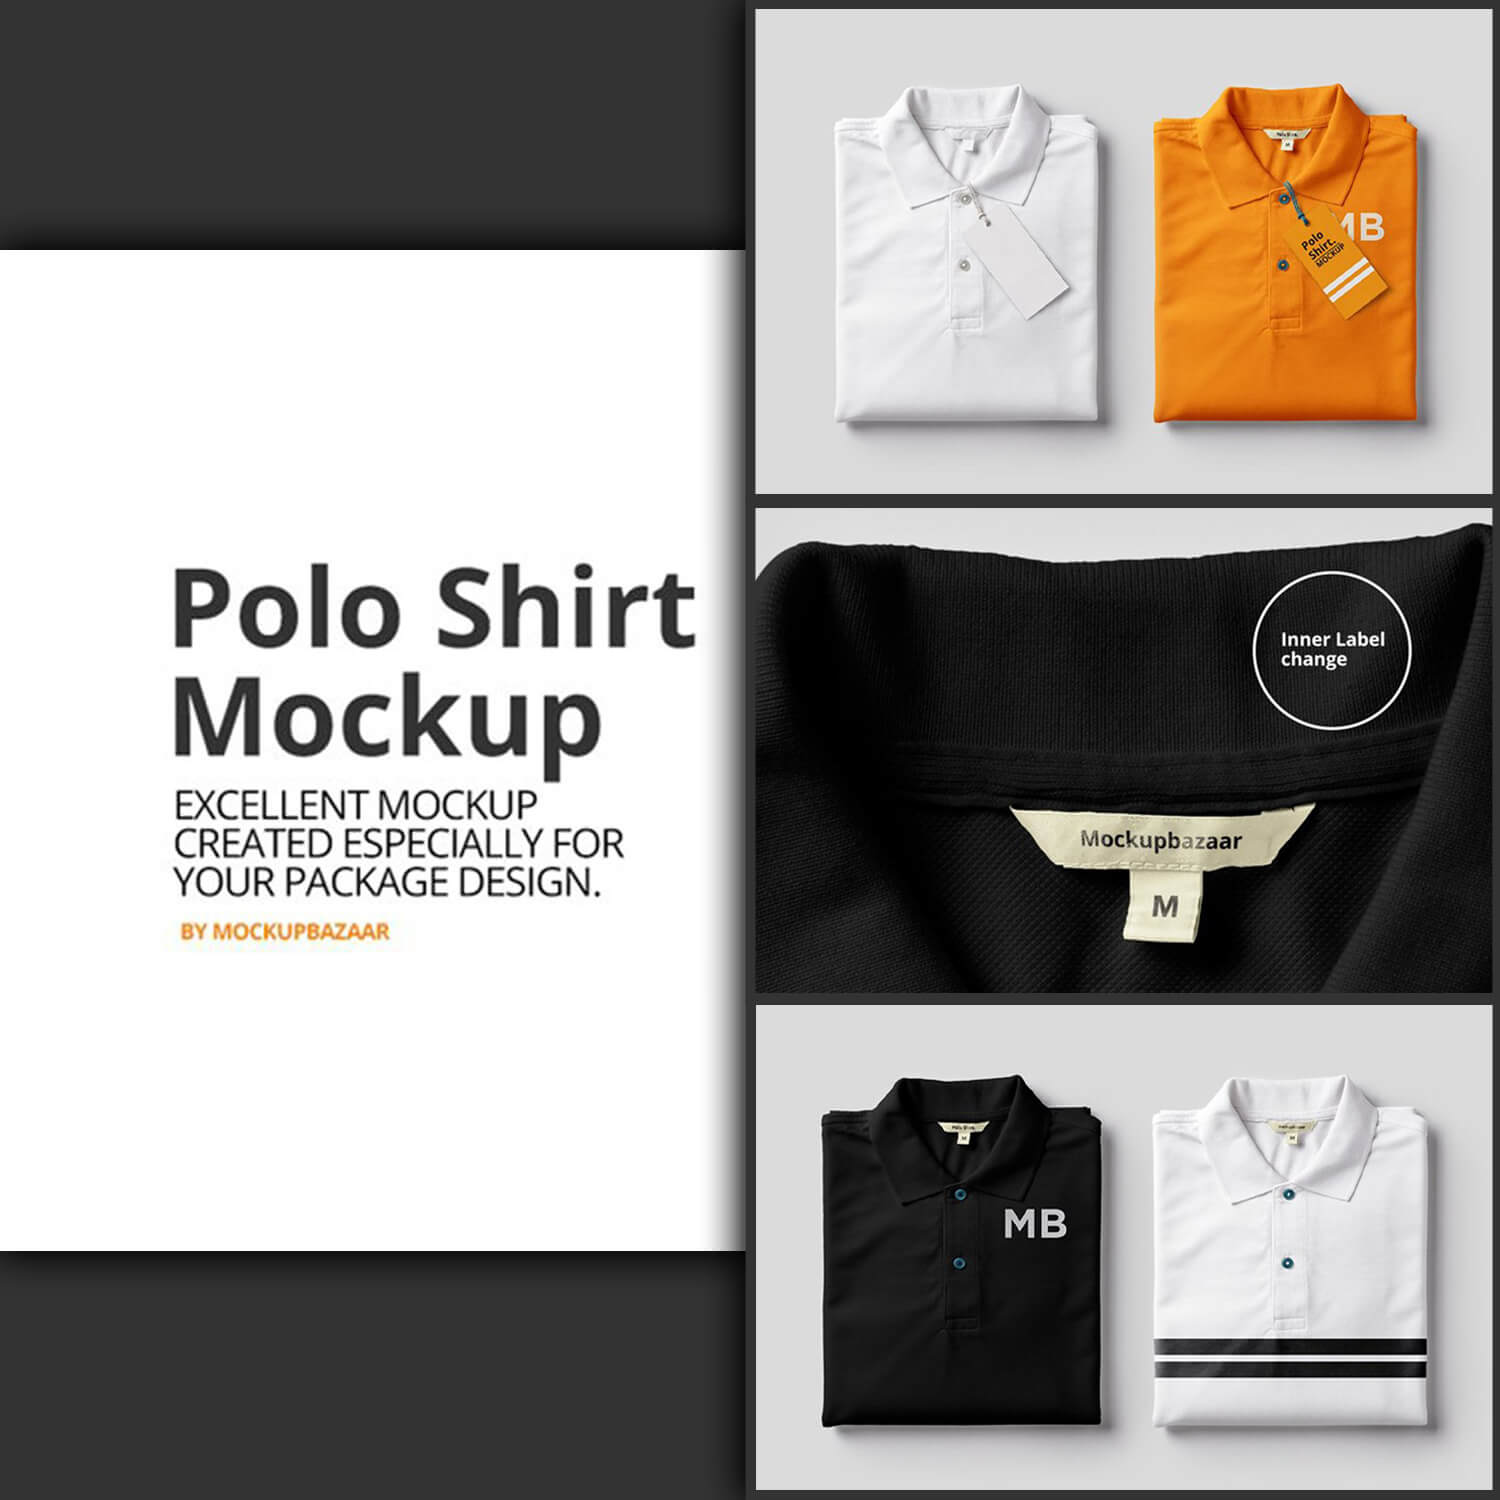 On a dark gray background, there is information about polo shirts, as well as images of shirts.